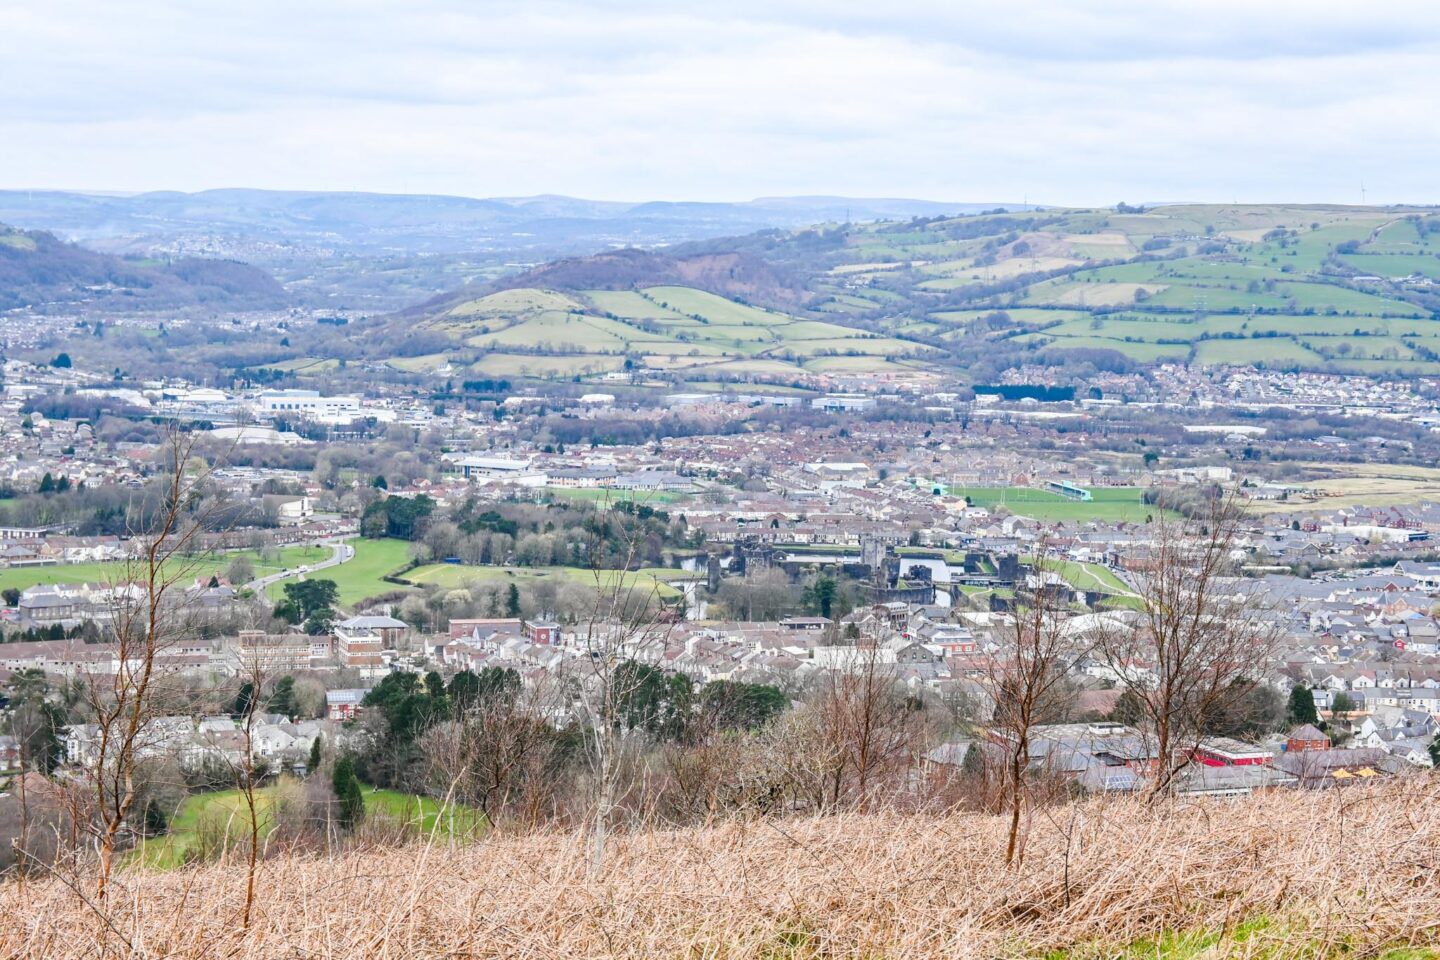 Caerphilly Mountain View over Caerphilly town